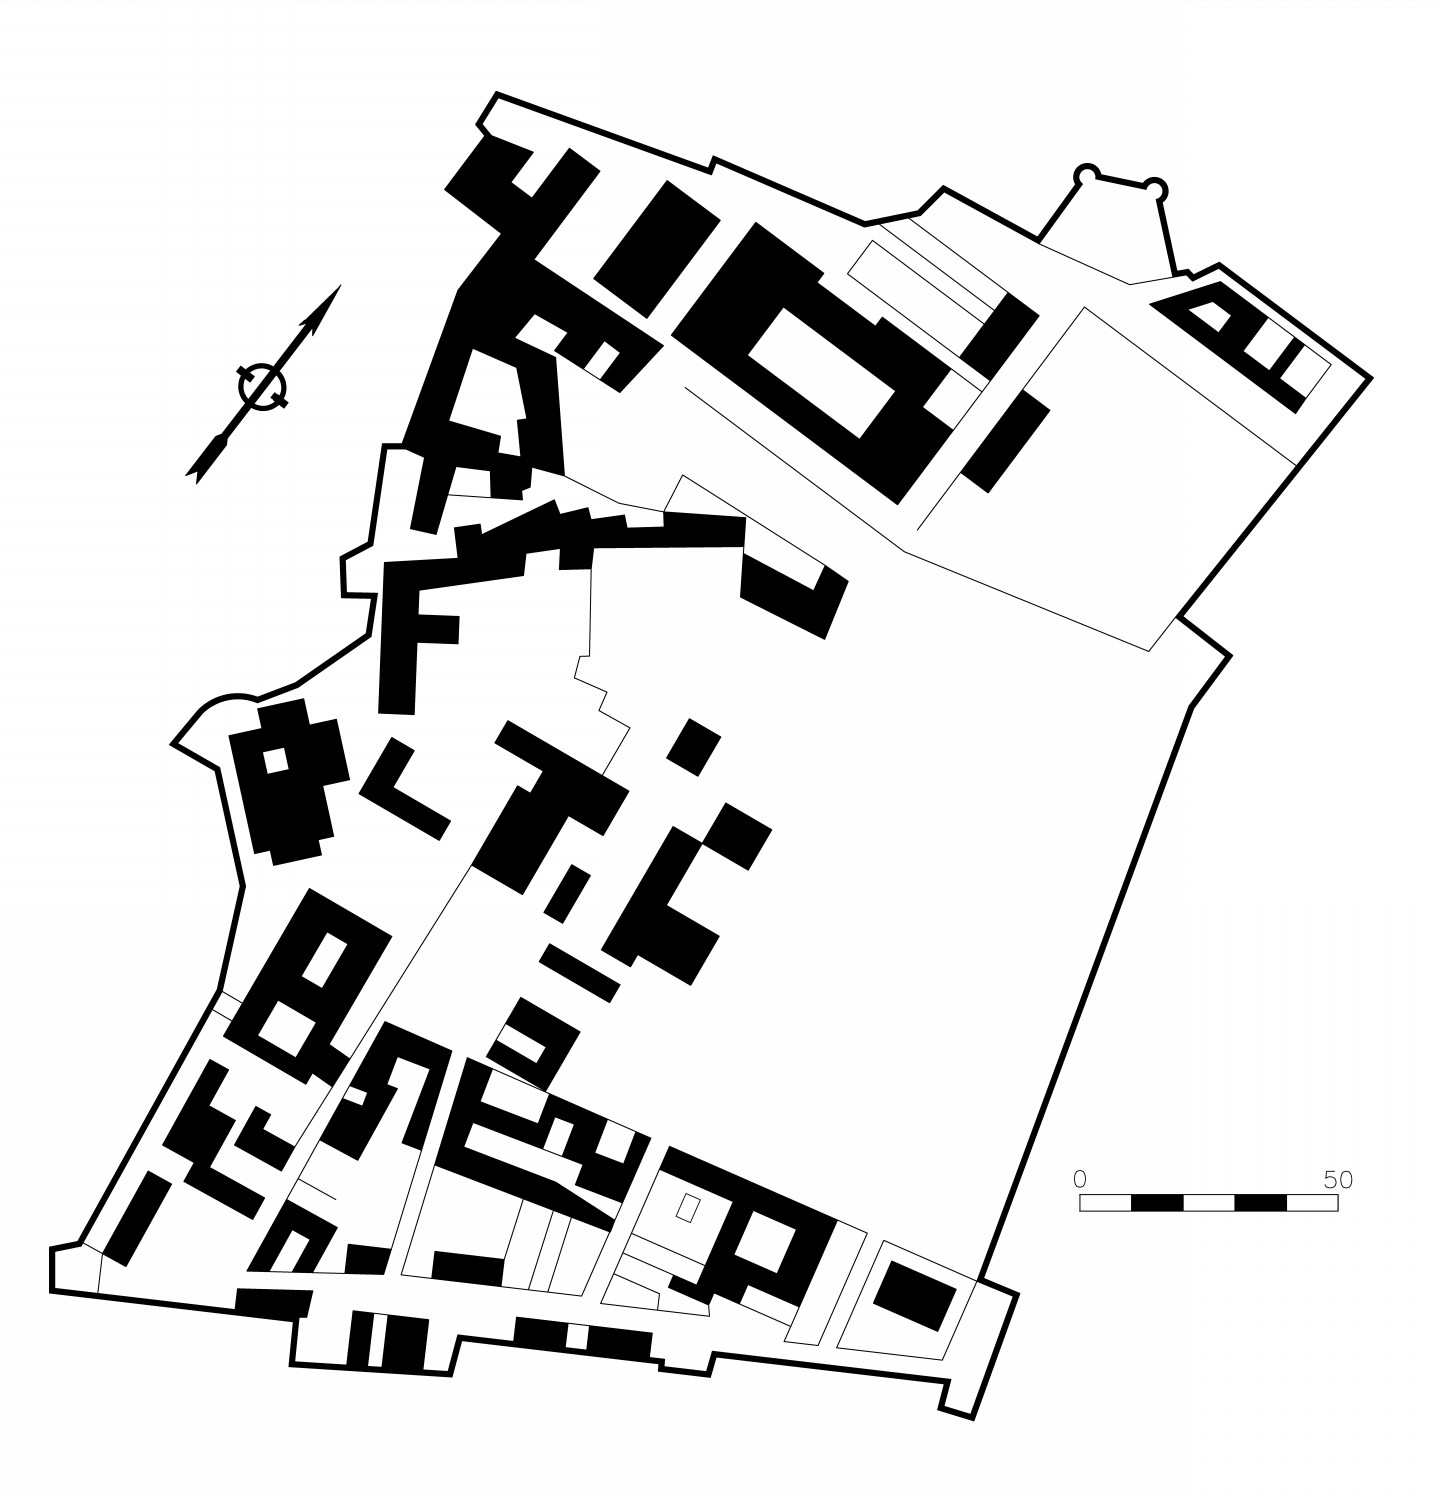 Site plan of the complex, Based on Gaubert (1845)